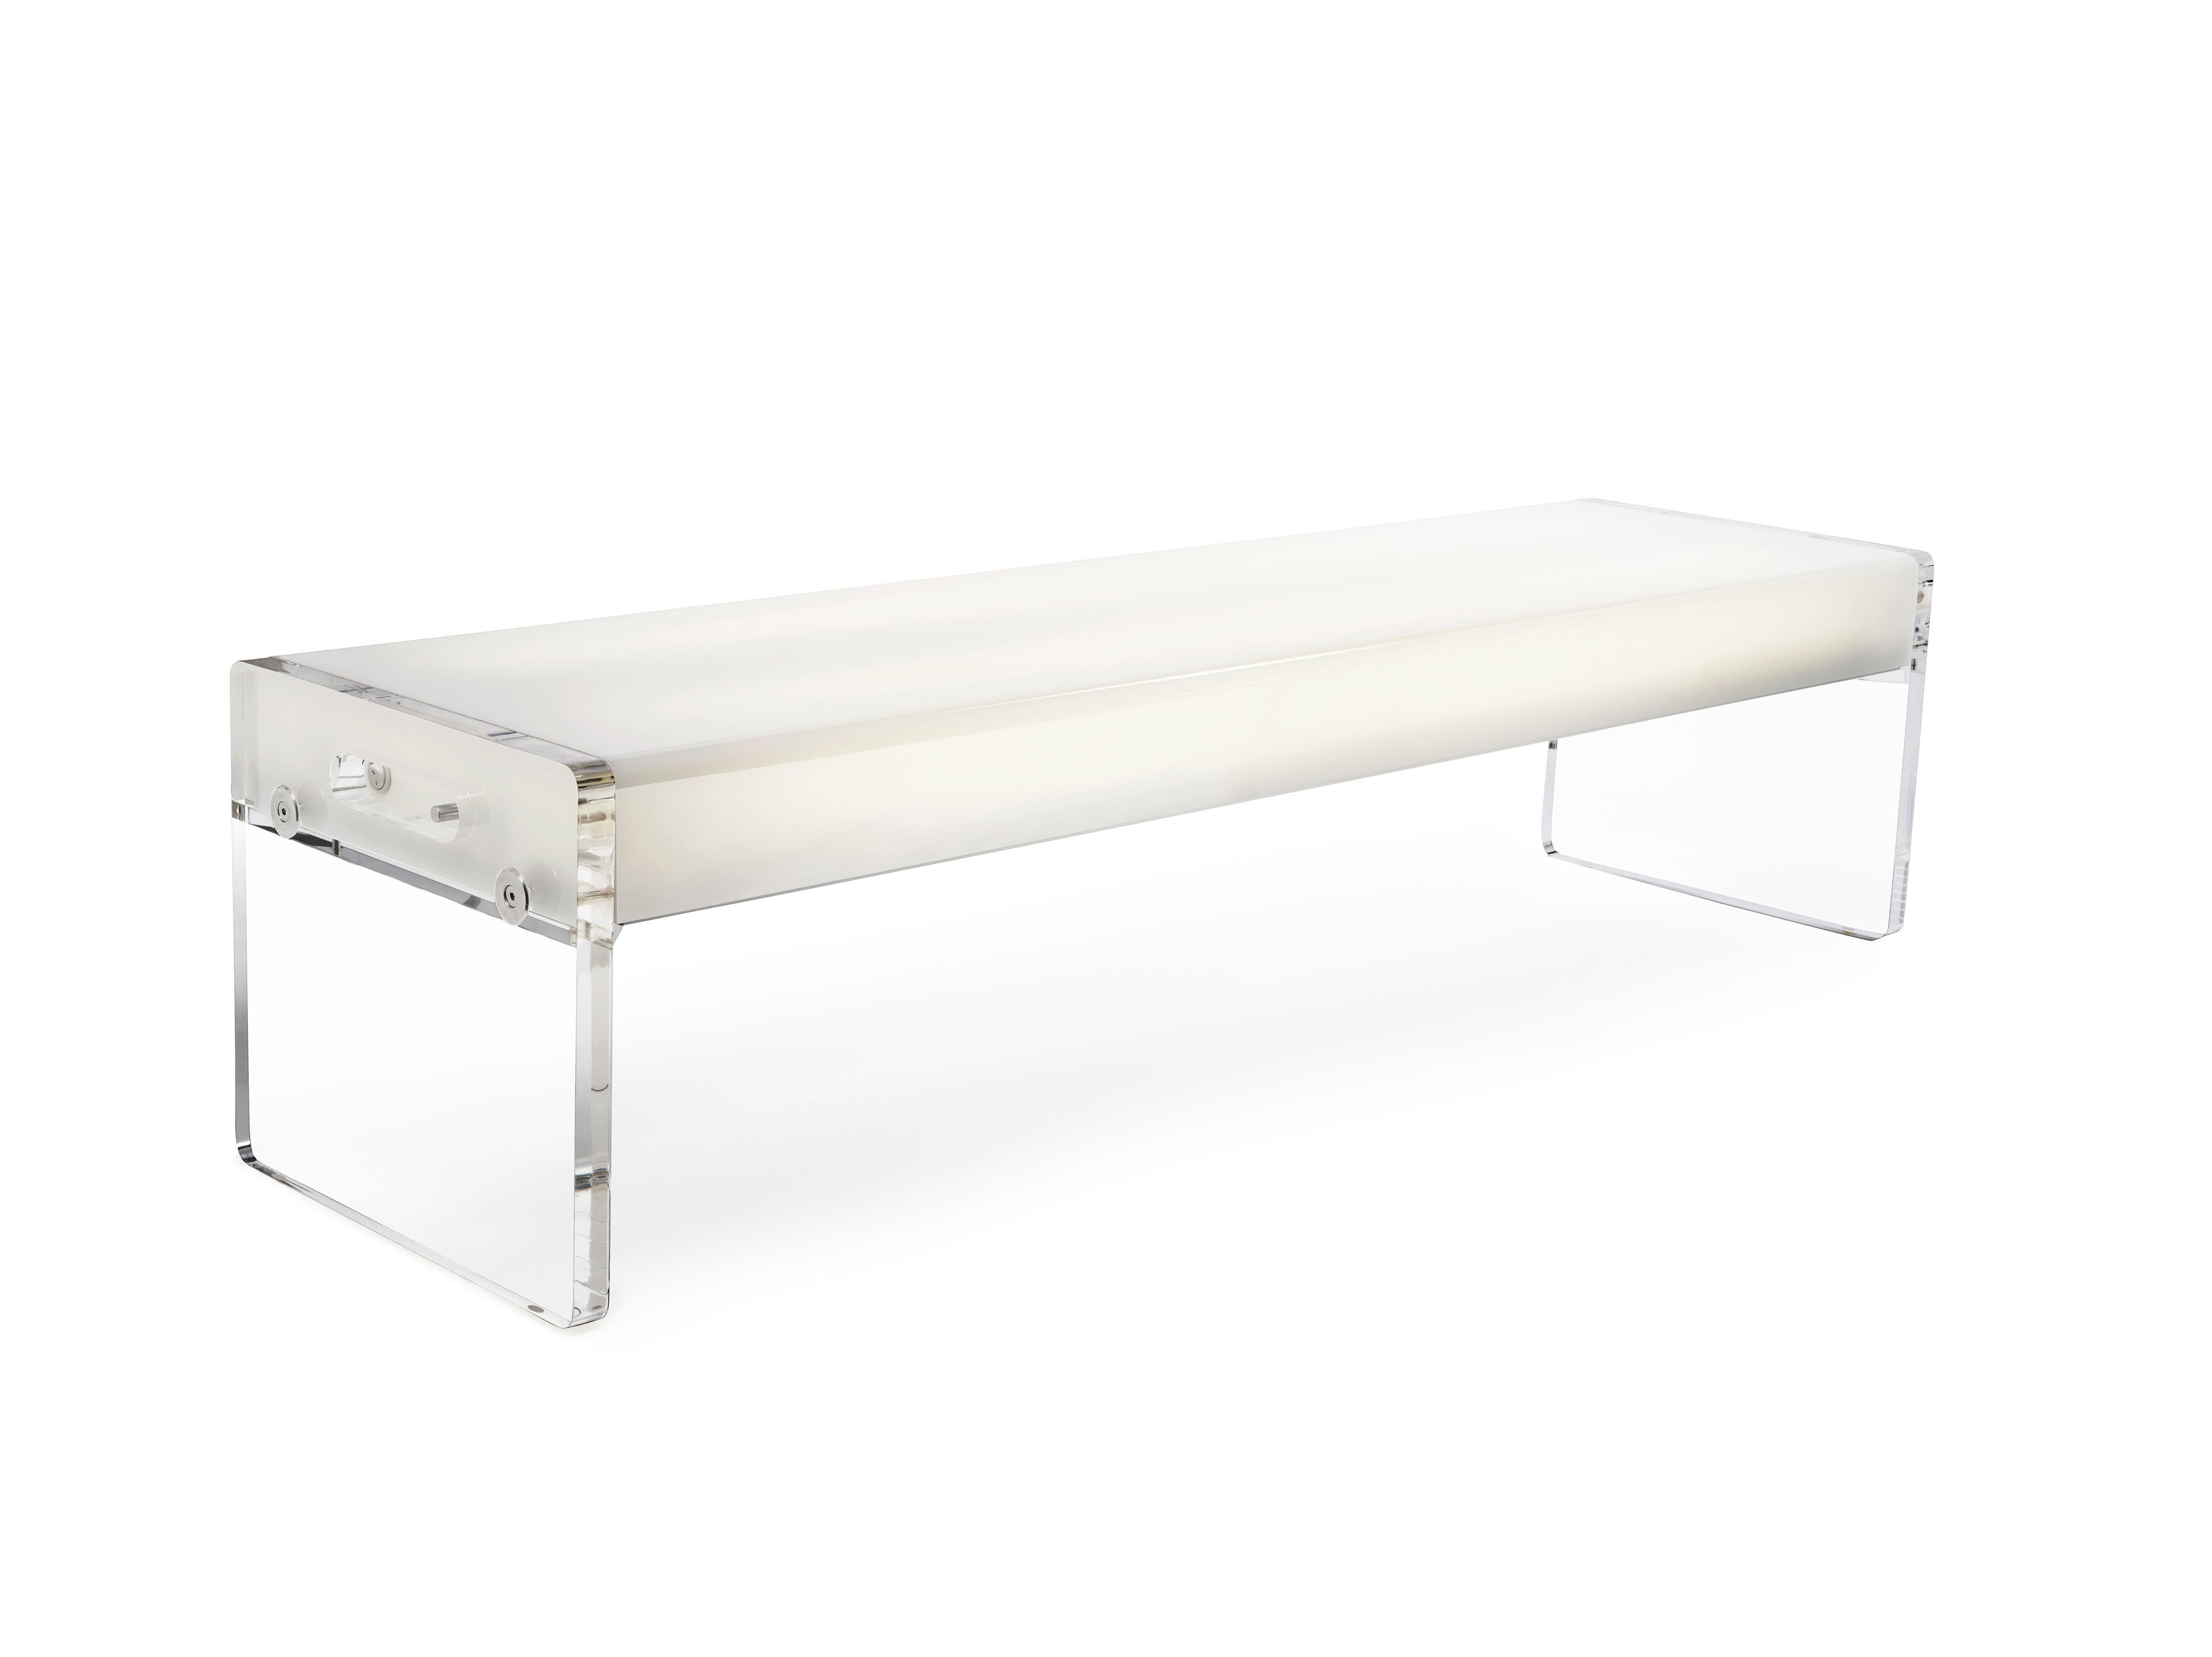 Light Bench provides the perfect interplay between utility and illumination. Suitable for displaying precious objects, or comfortable seating for two. It’s perfect for entry ways, living areas or for display. Multiple benches can be arranged to